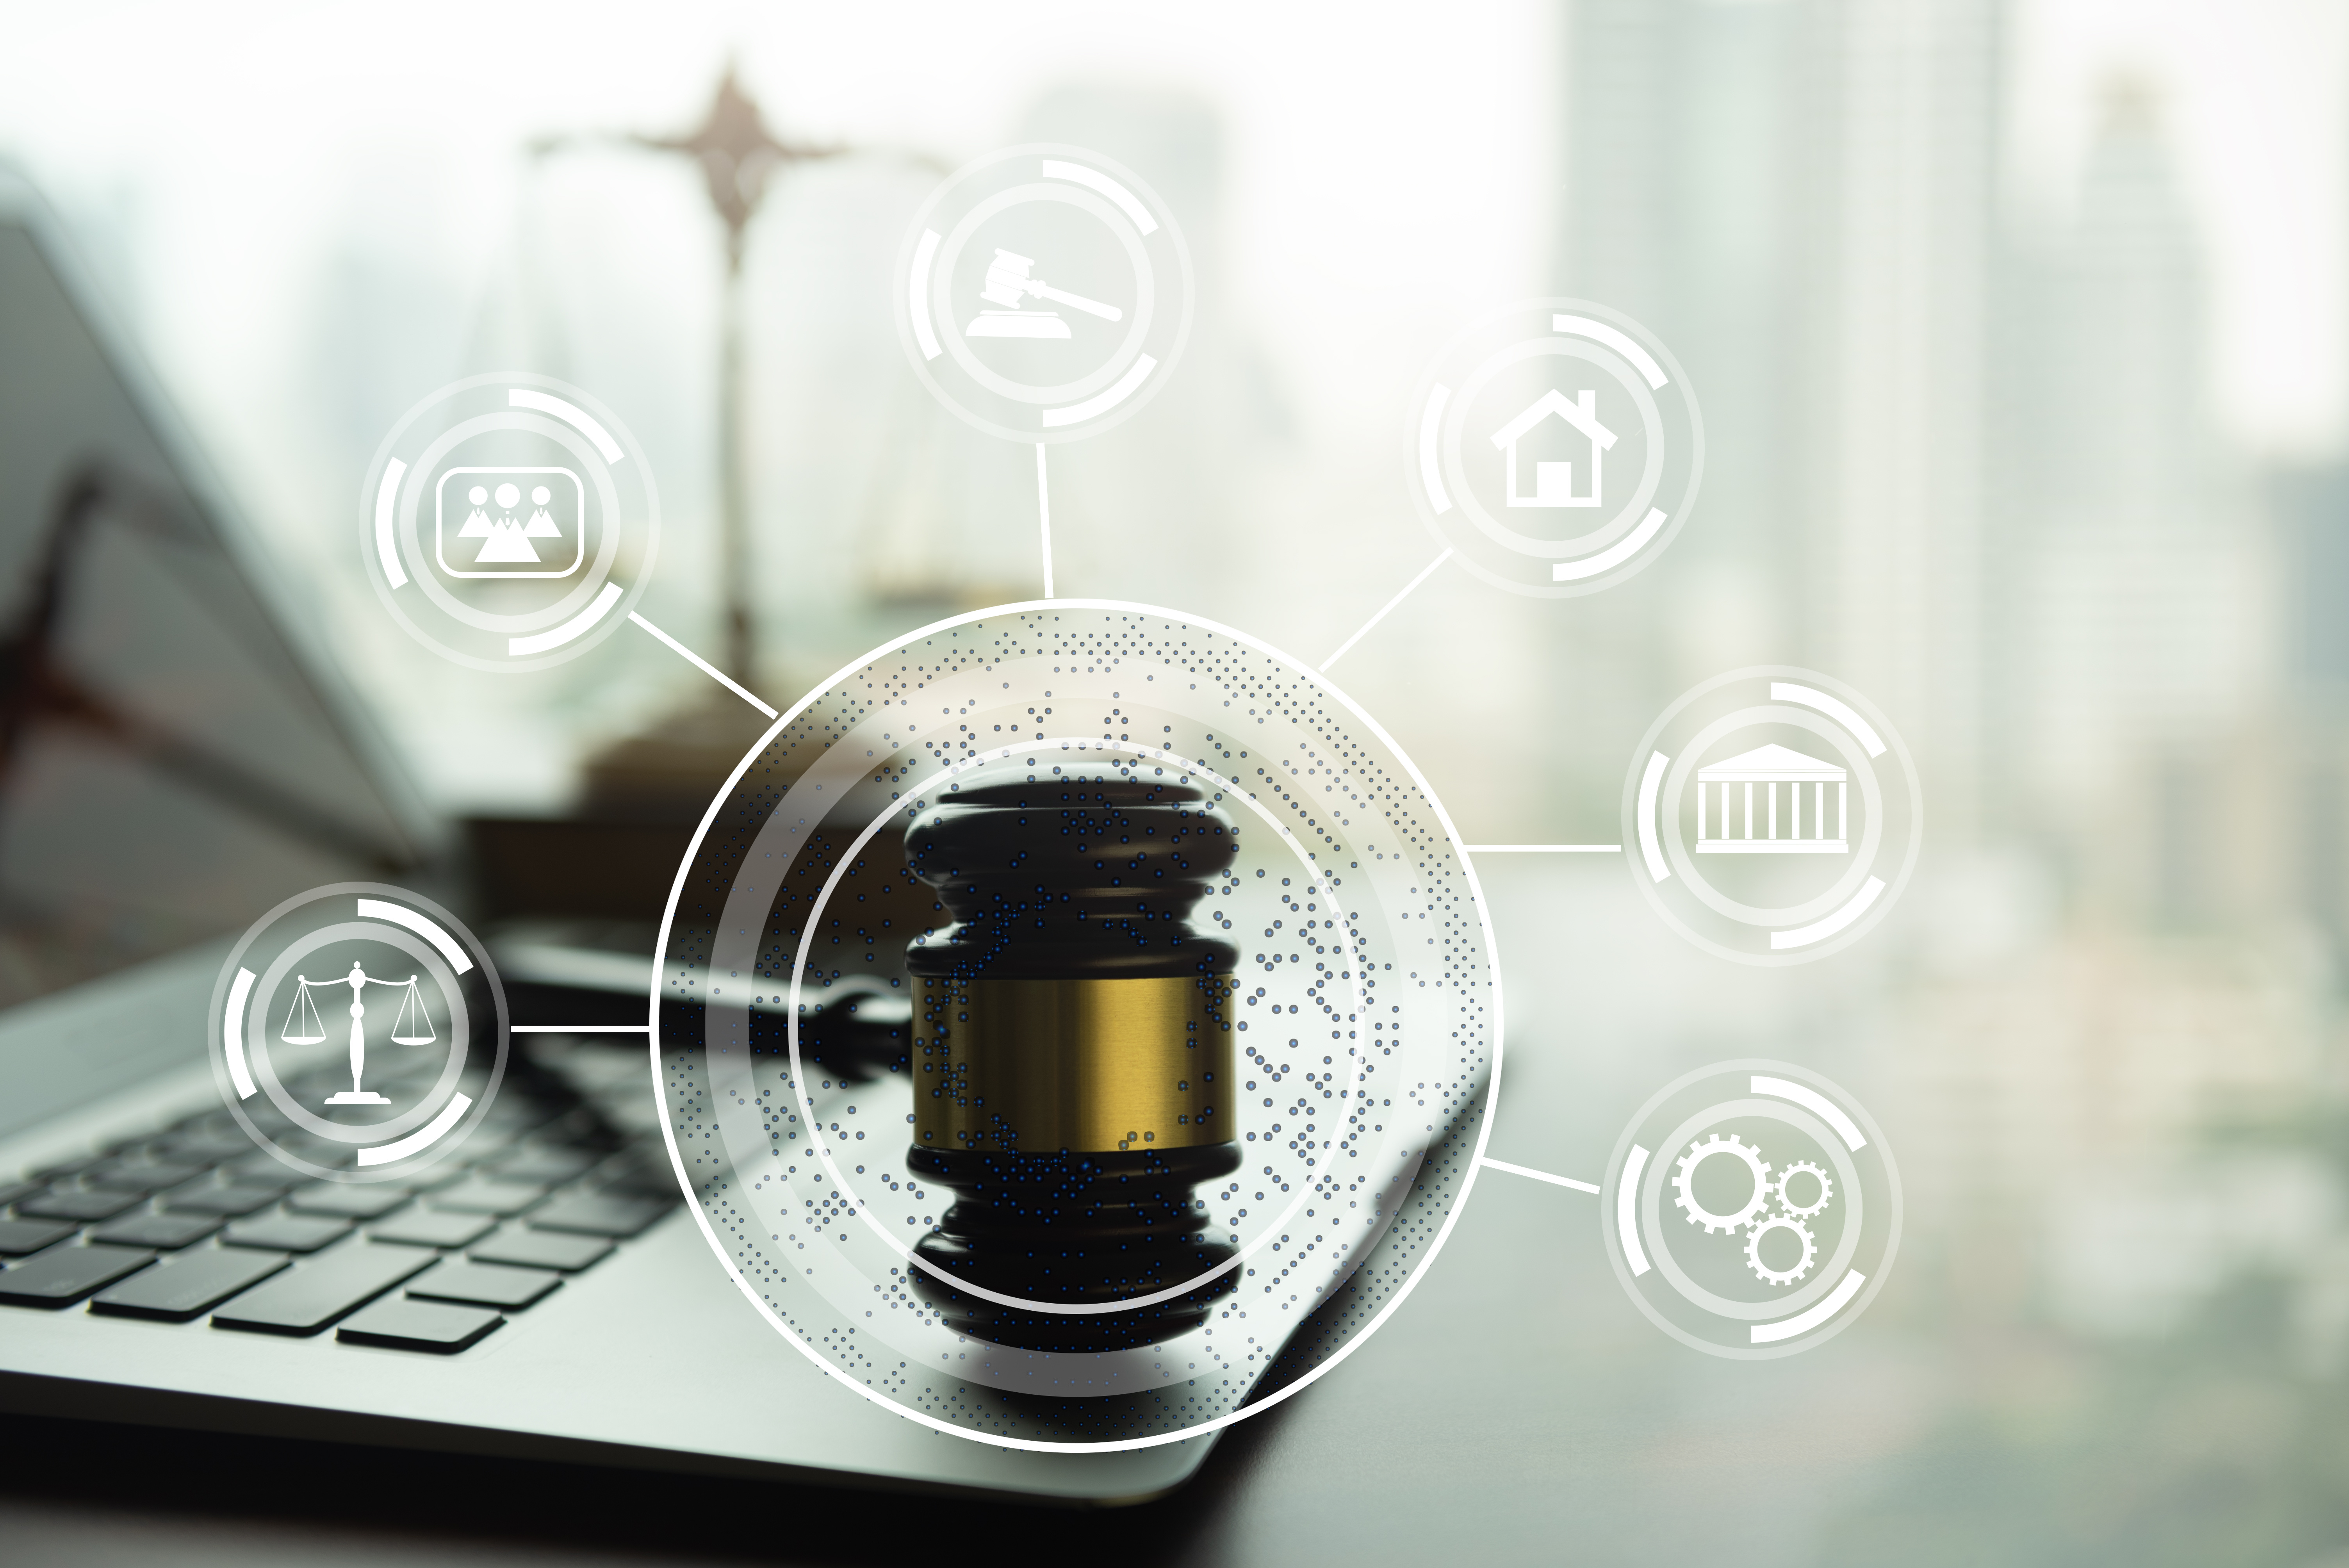 An image of a gavel hitting a laptop representing how managed IT services for law firms can transform law practices.